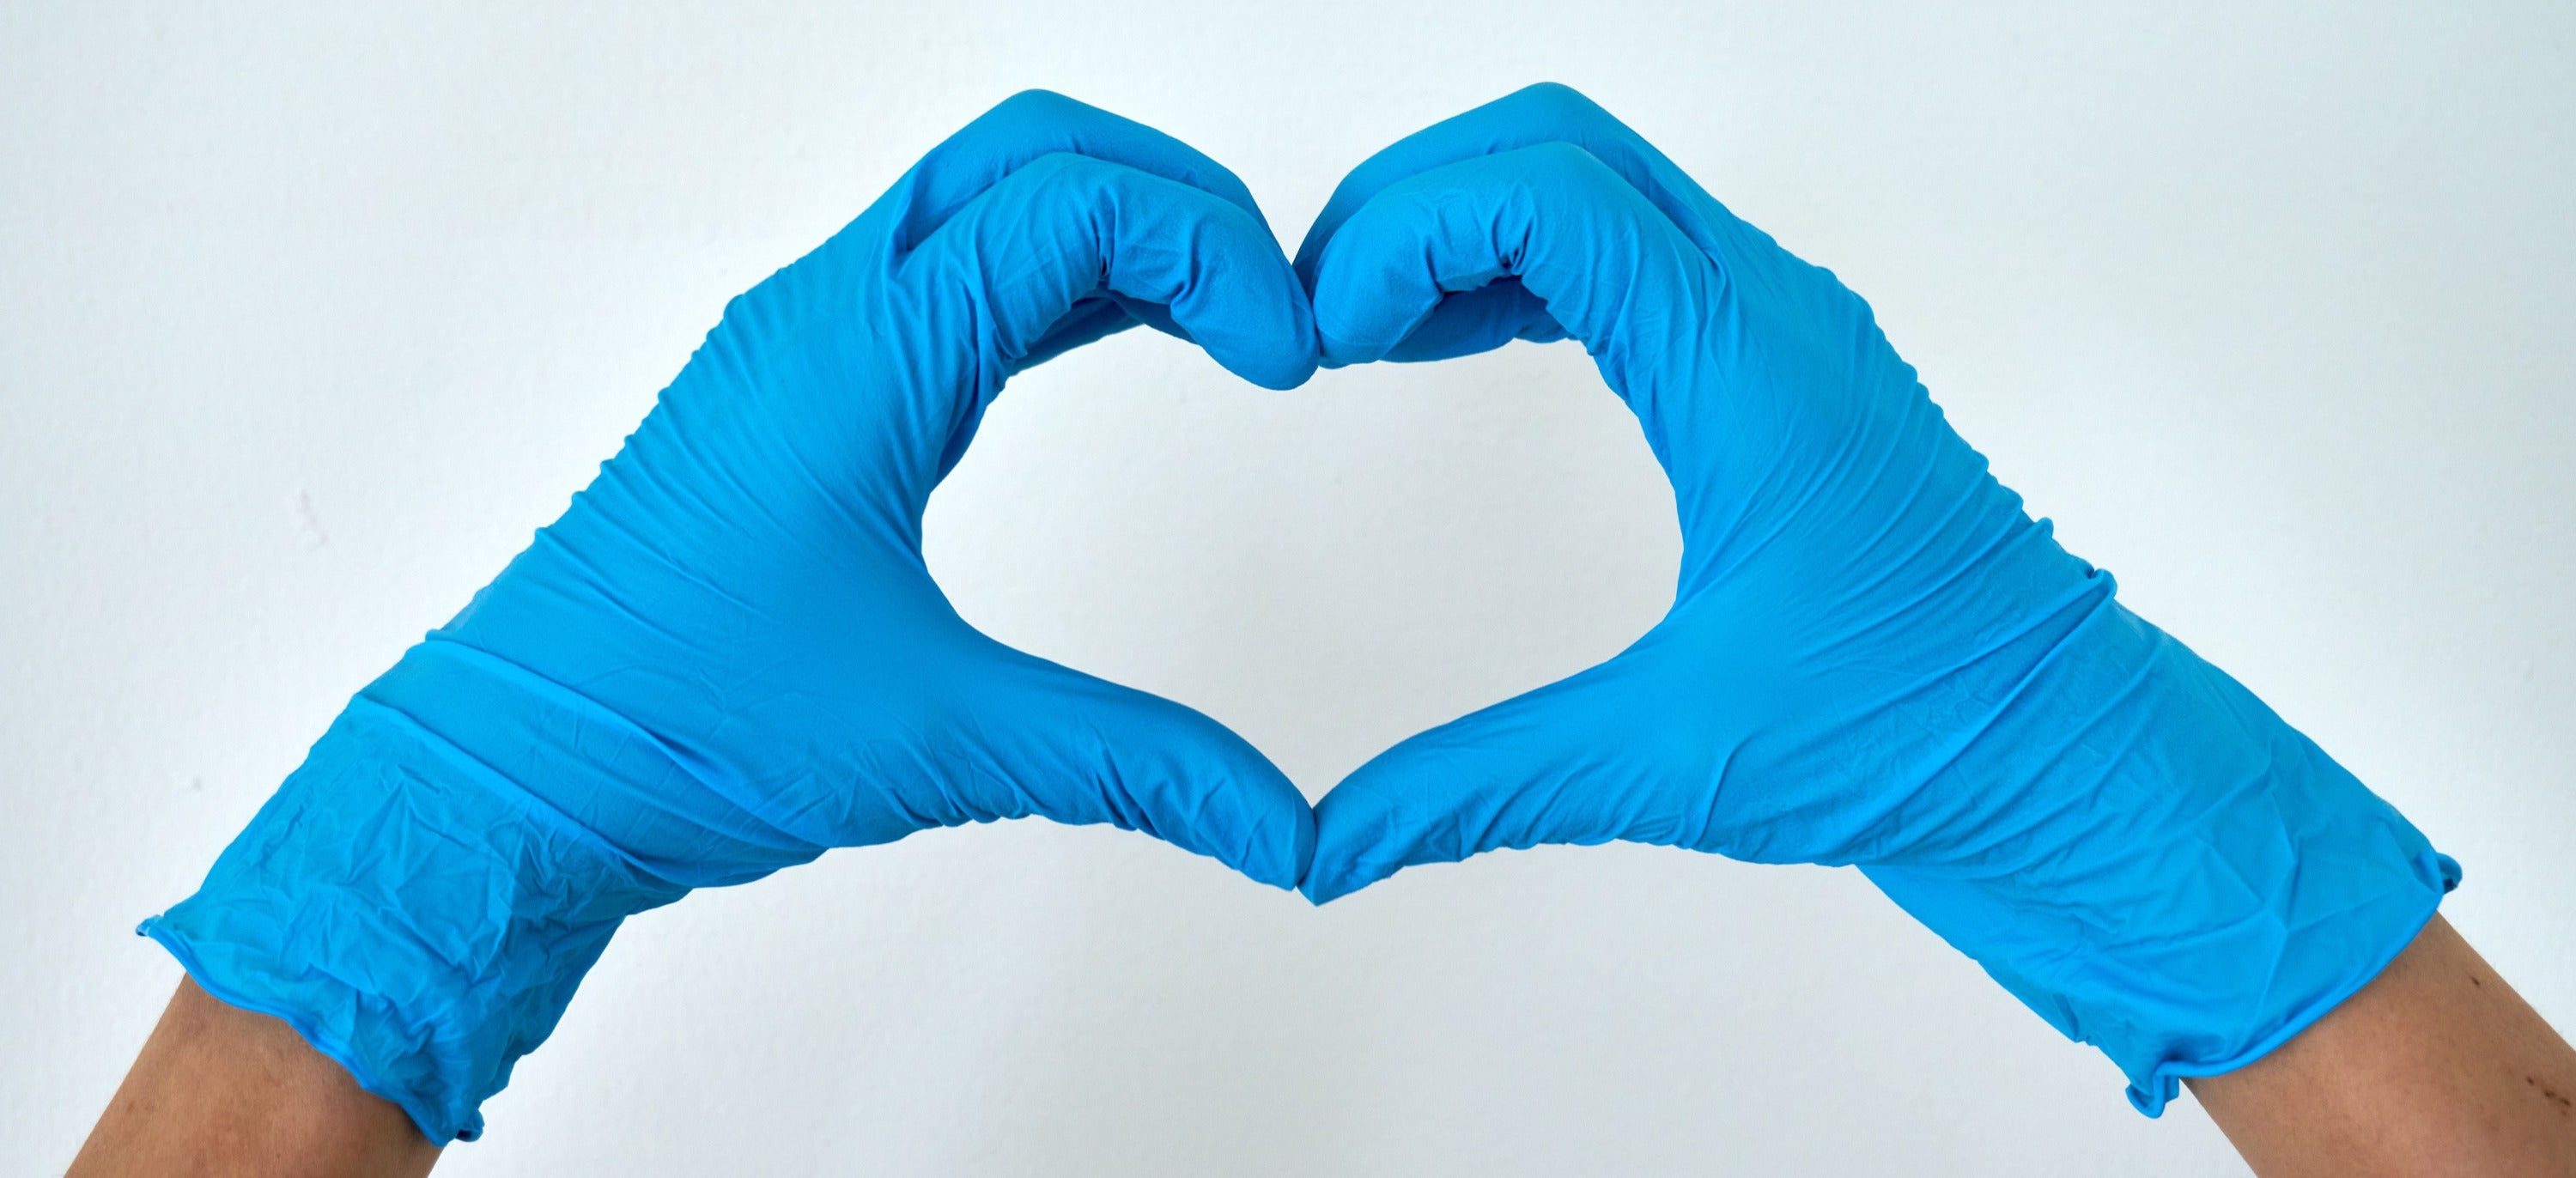 Hands in blue medical glowes form a heart shape